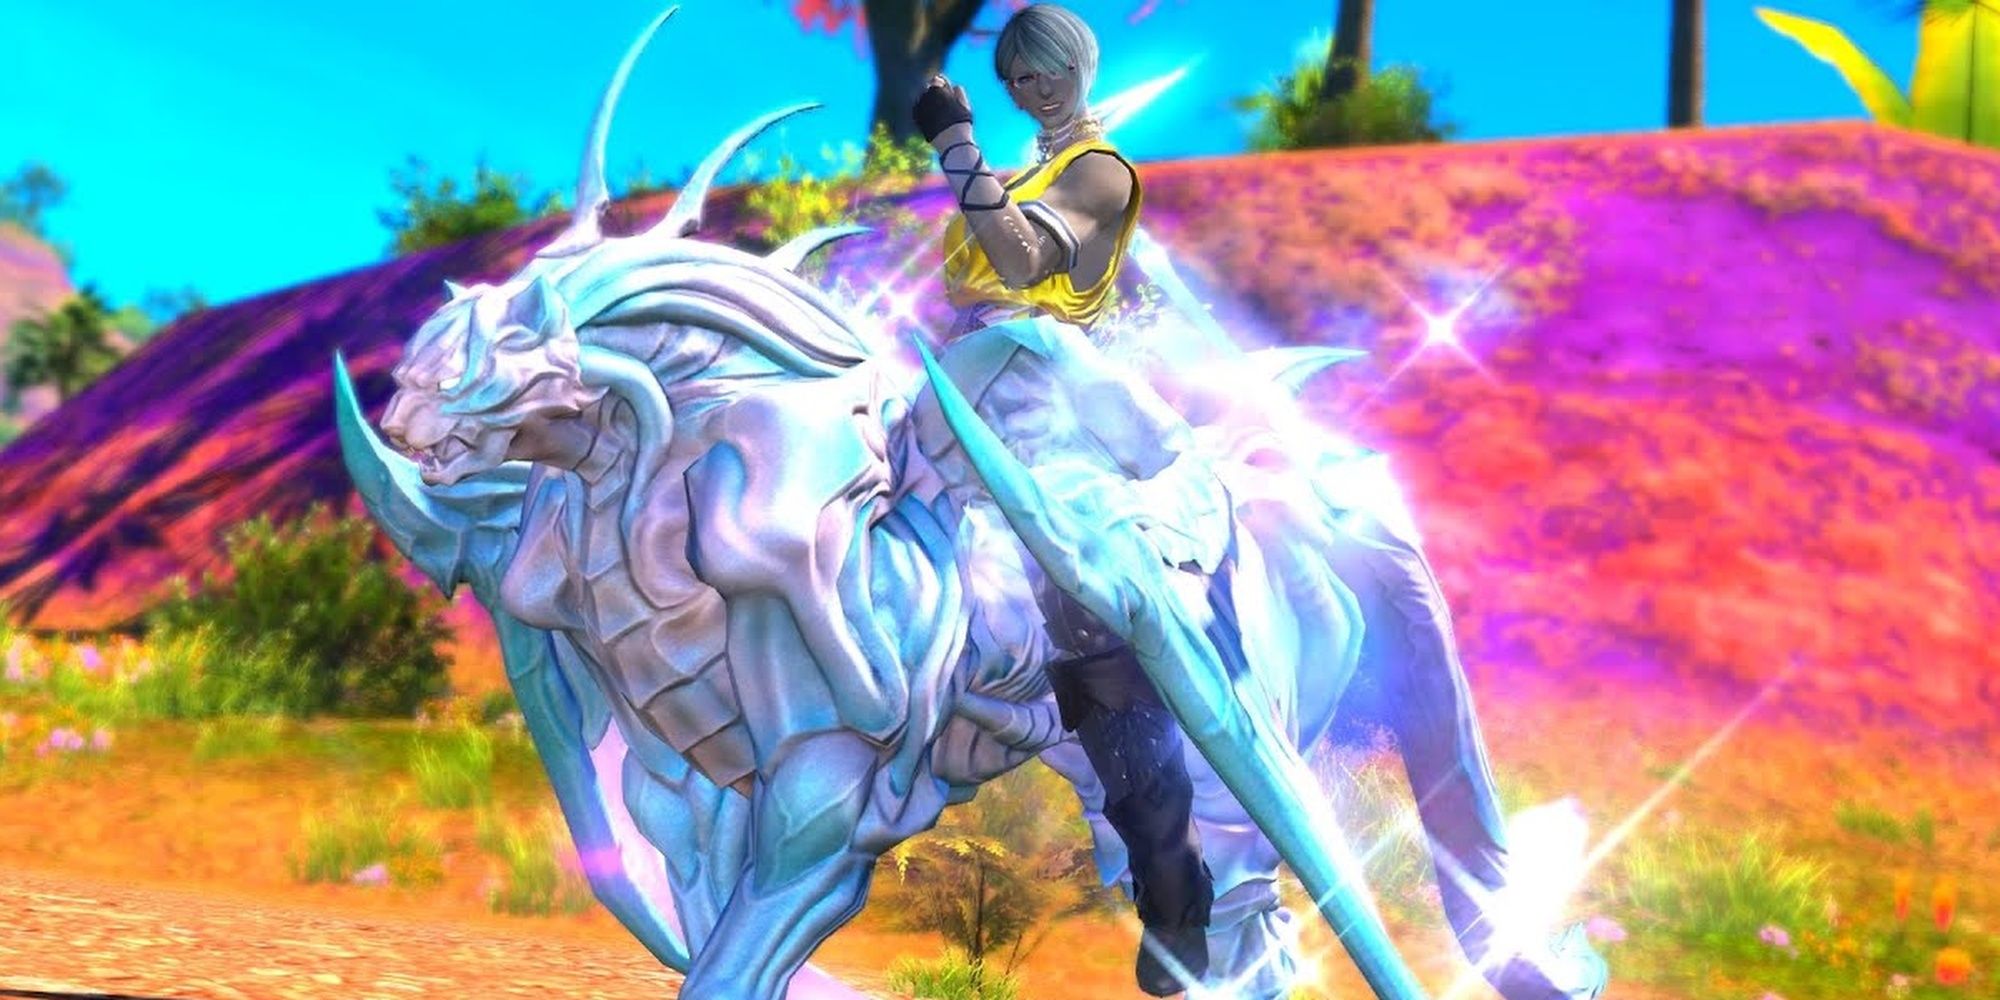 Final Fantasy 14 Lynx Of Divine Light With Rider On Vibrant Background